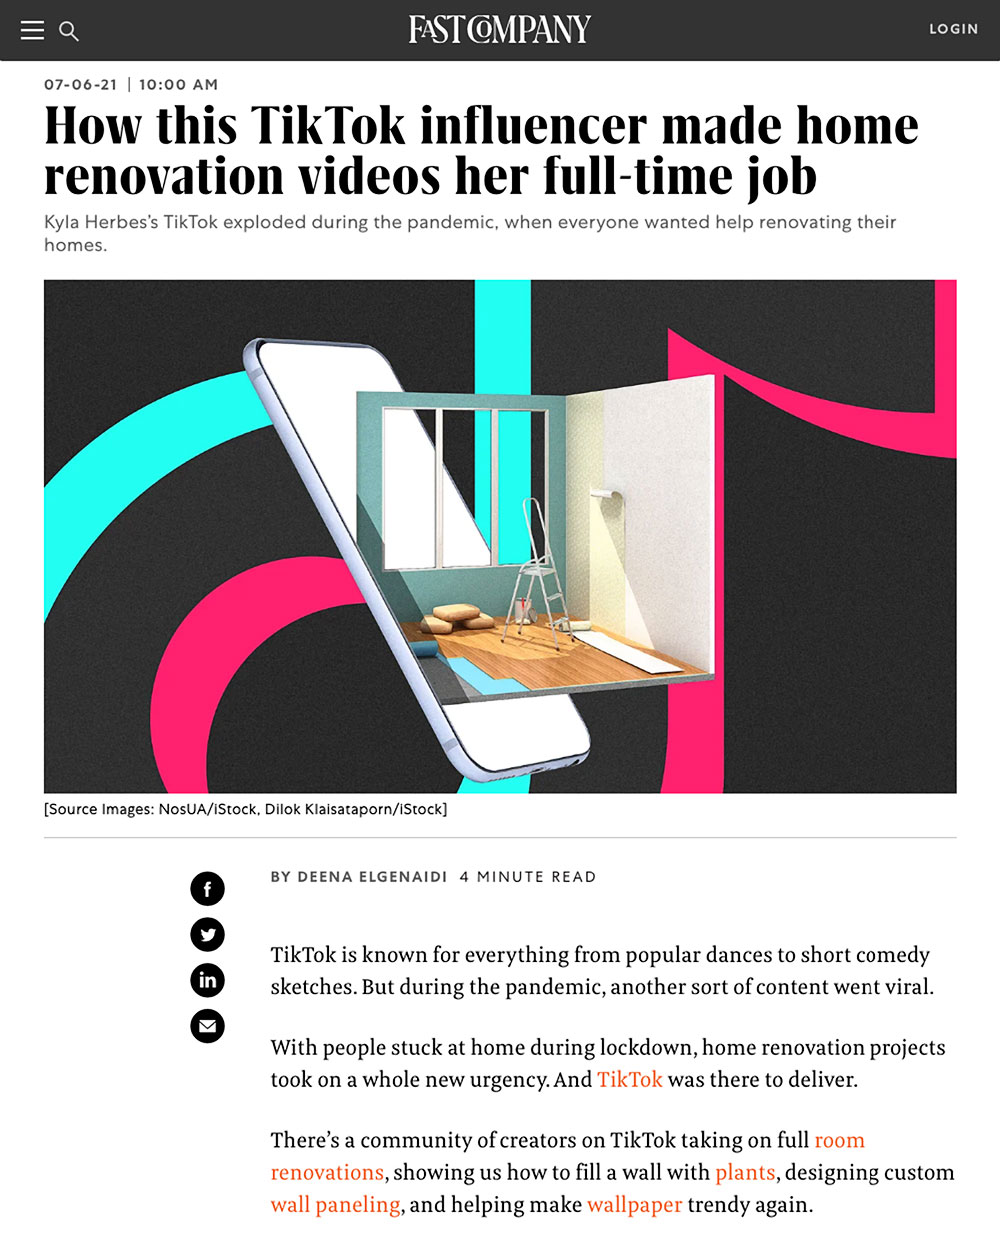 How this TikTok influencer made home renovation videos her full-time job Kyla Herbes’s TikTok exploded during the pandemic, when everyone wanted help renovating their homes.